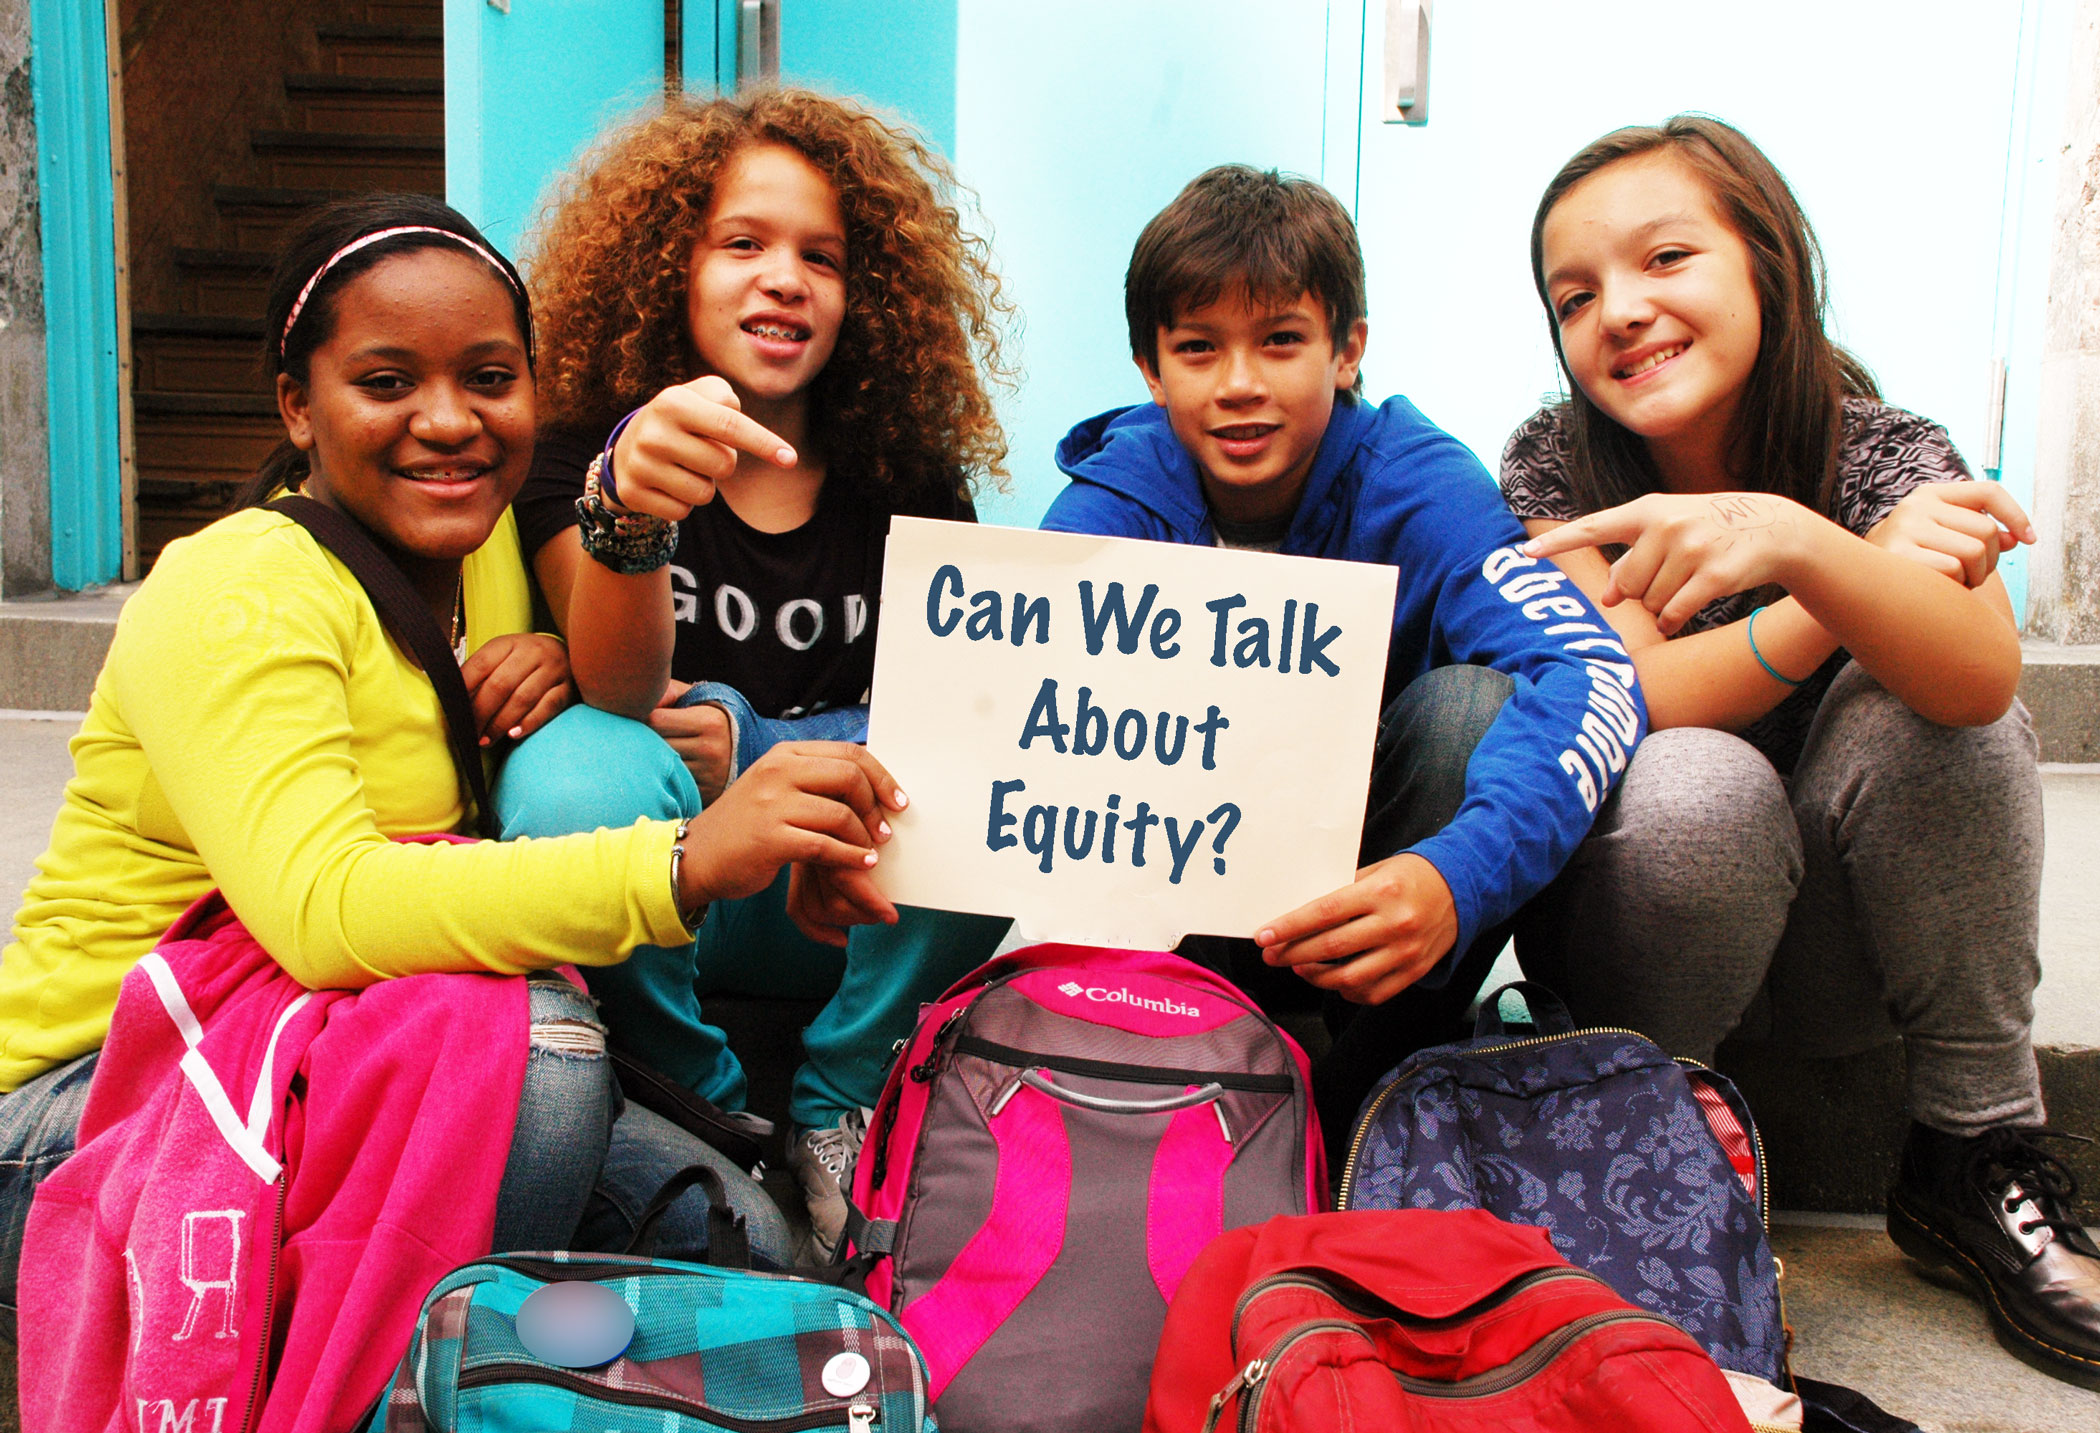 Diverse Students Holding Sign, "Can We Talk About Equity"